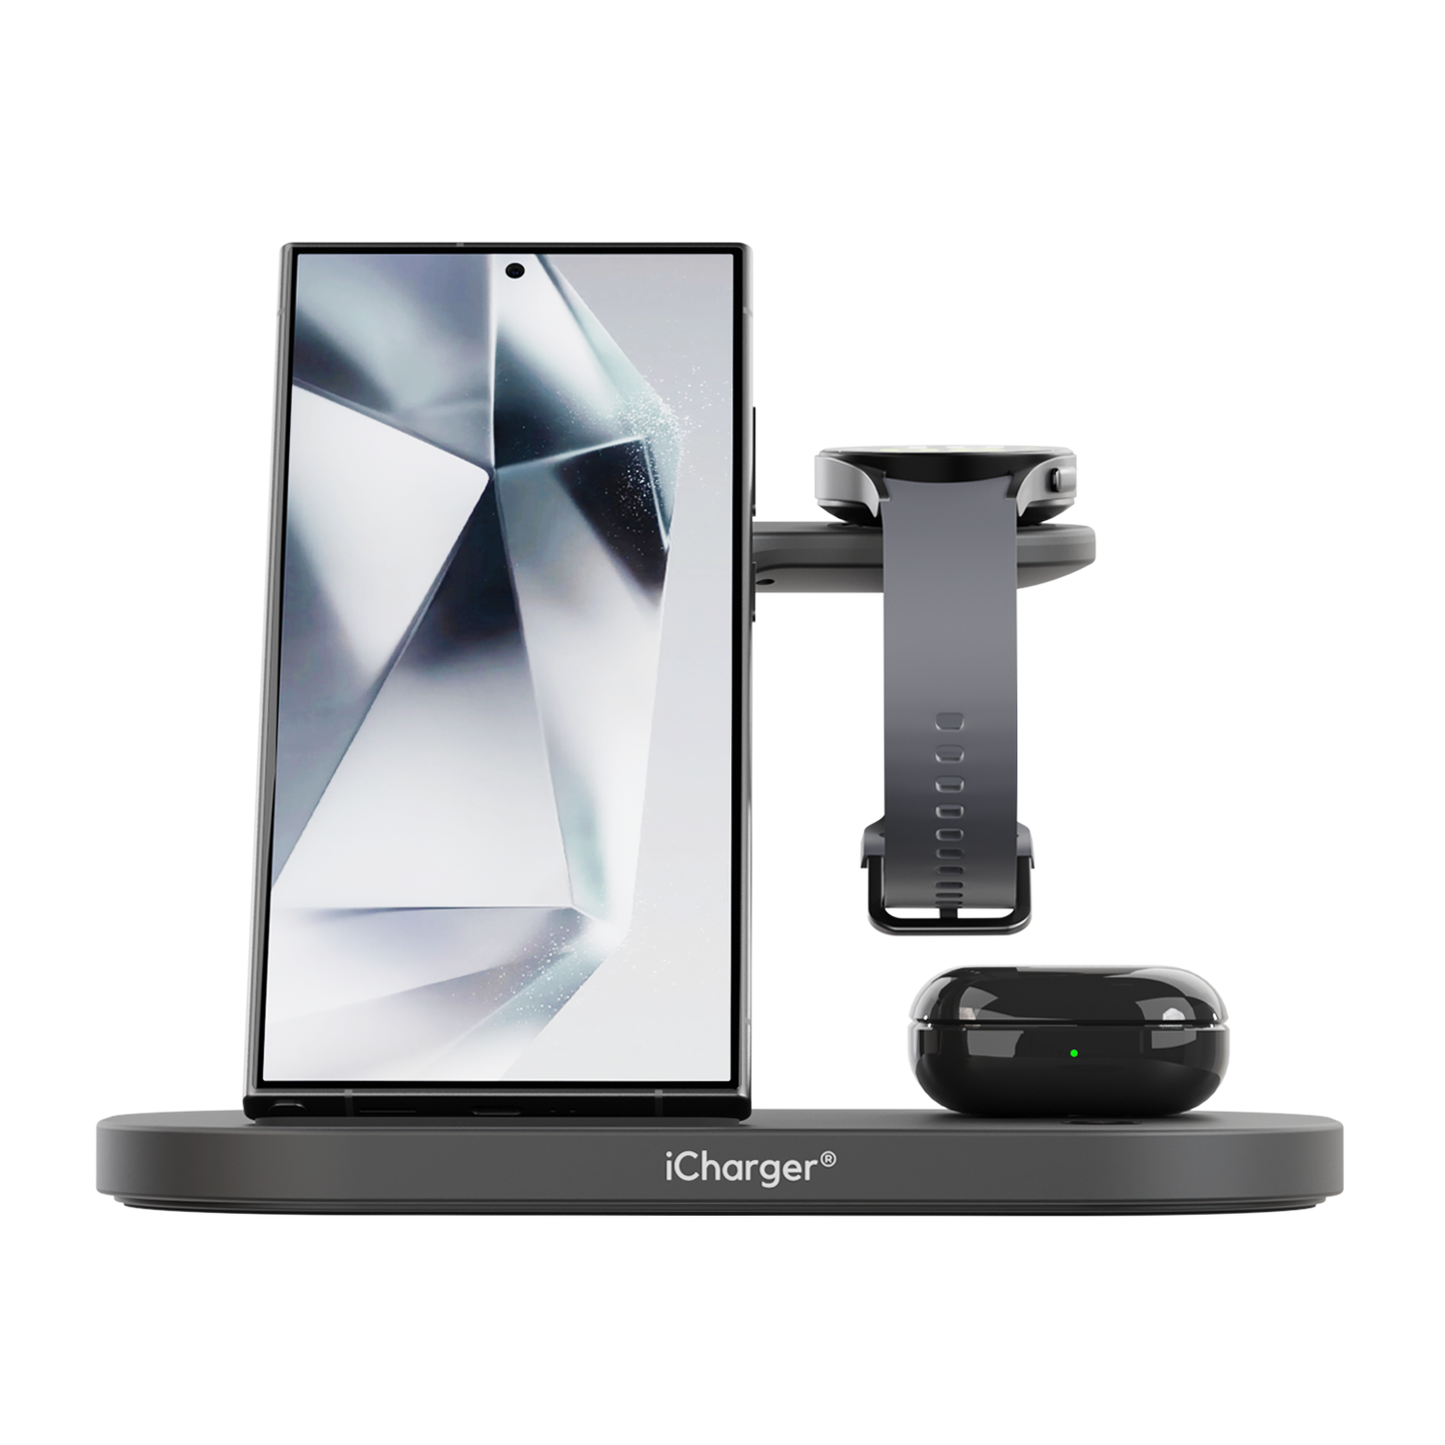 iCharger Samsung Pro 3-in-1 Qi wireless charger displaying charging status on Galaxy smartphone screen with smartwatch and earbuds docked.